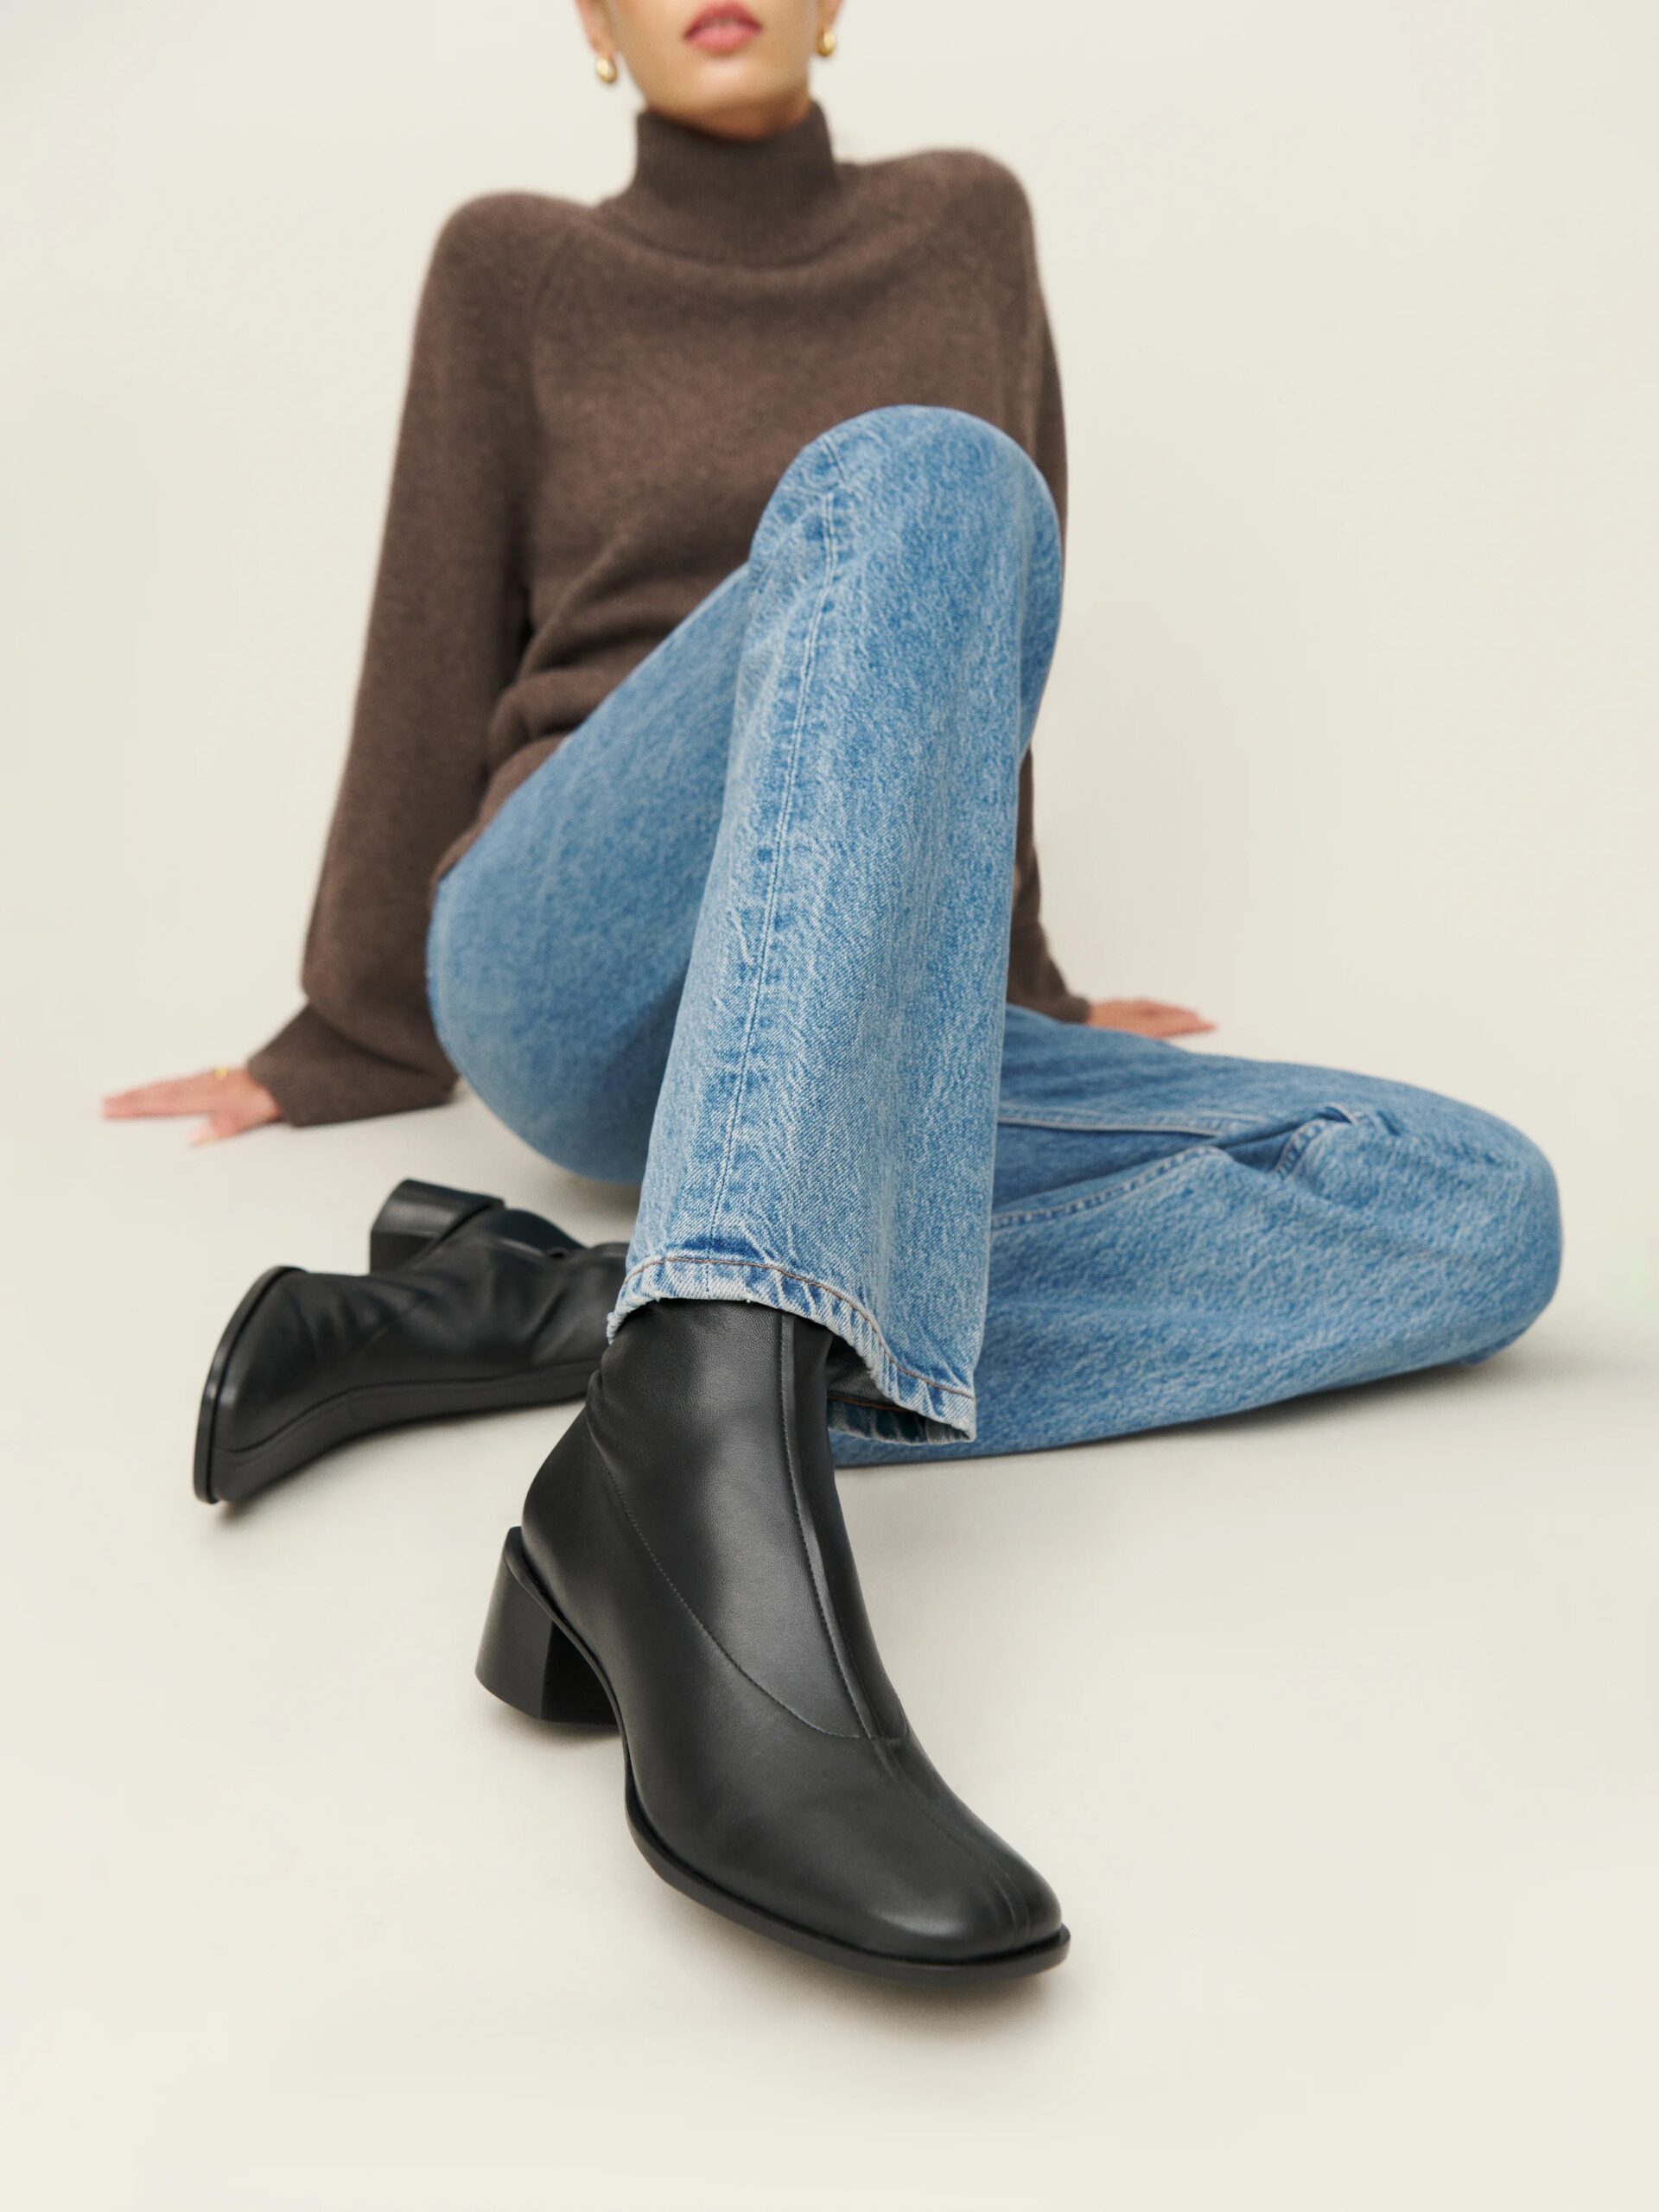 Person wearing a brown sweater and blue jeans, sitting on the floor, showcasing black ankle boots with block heels.